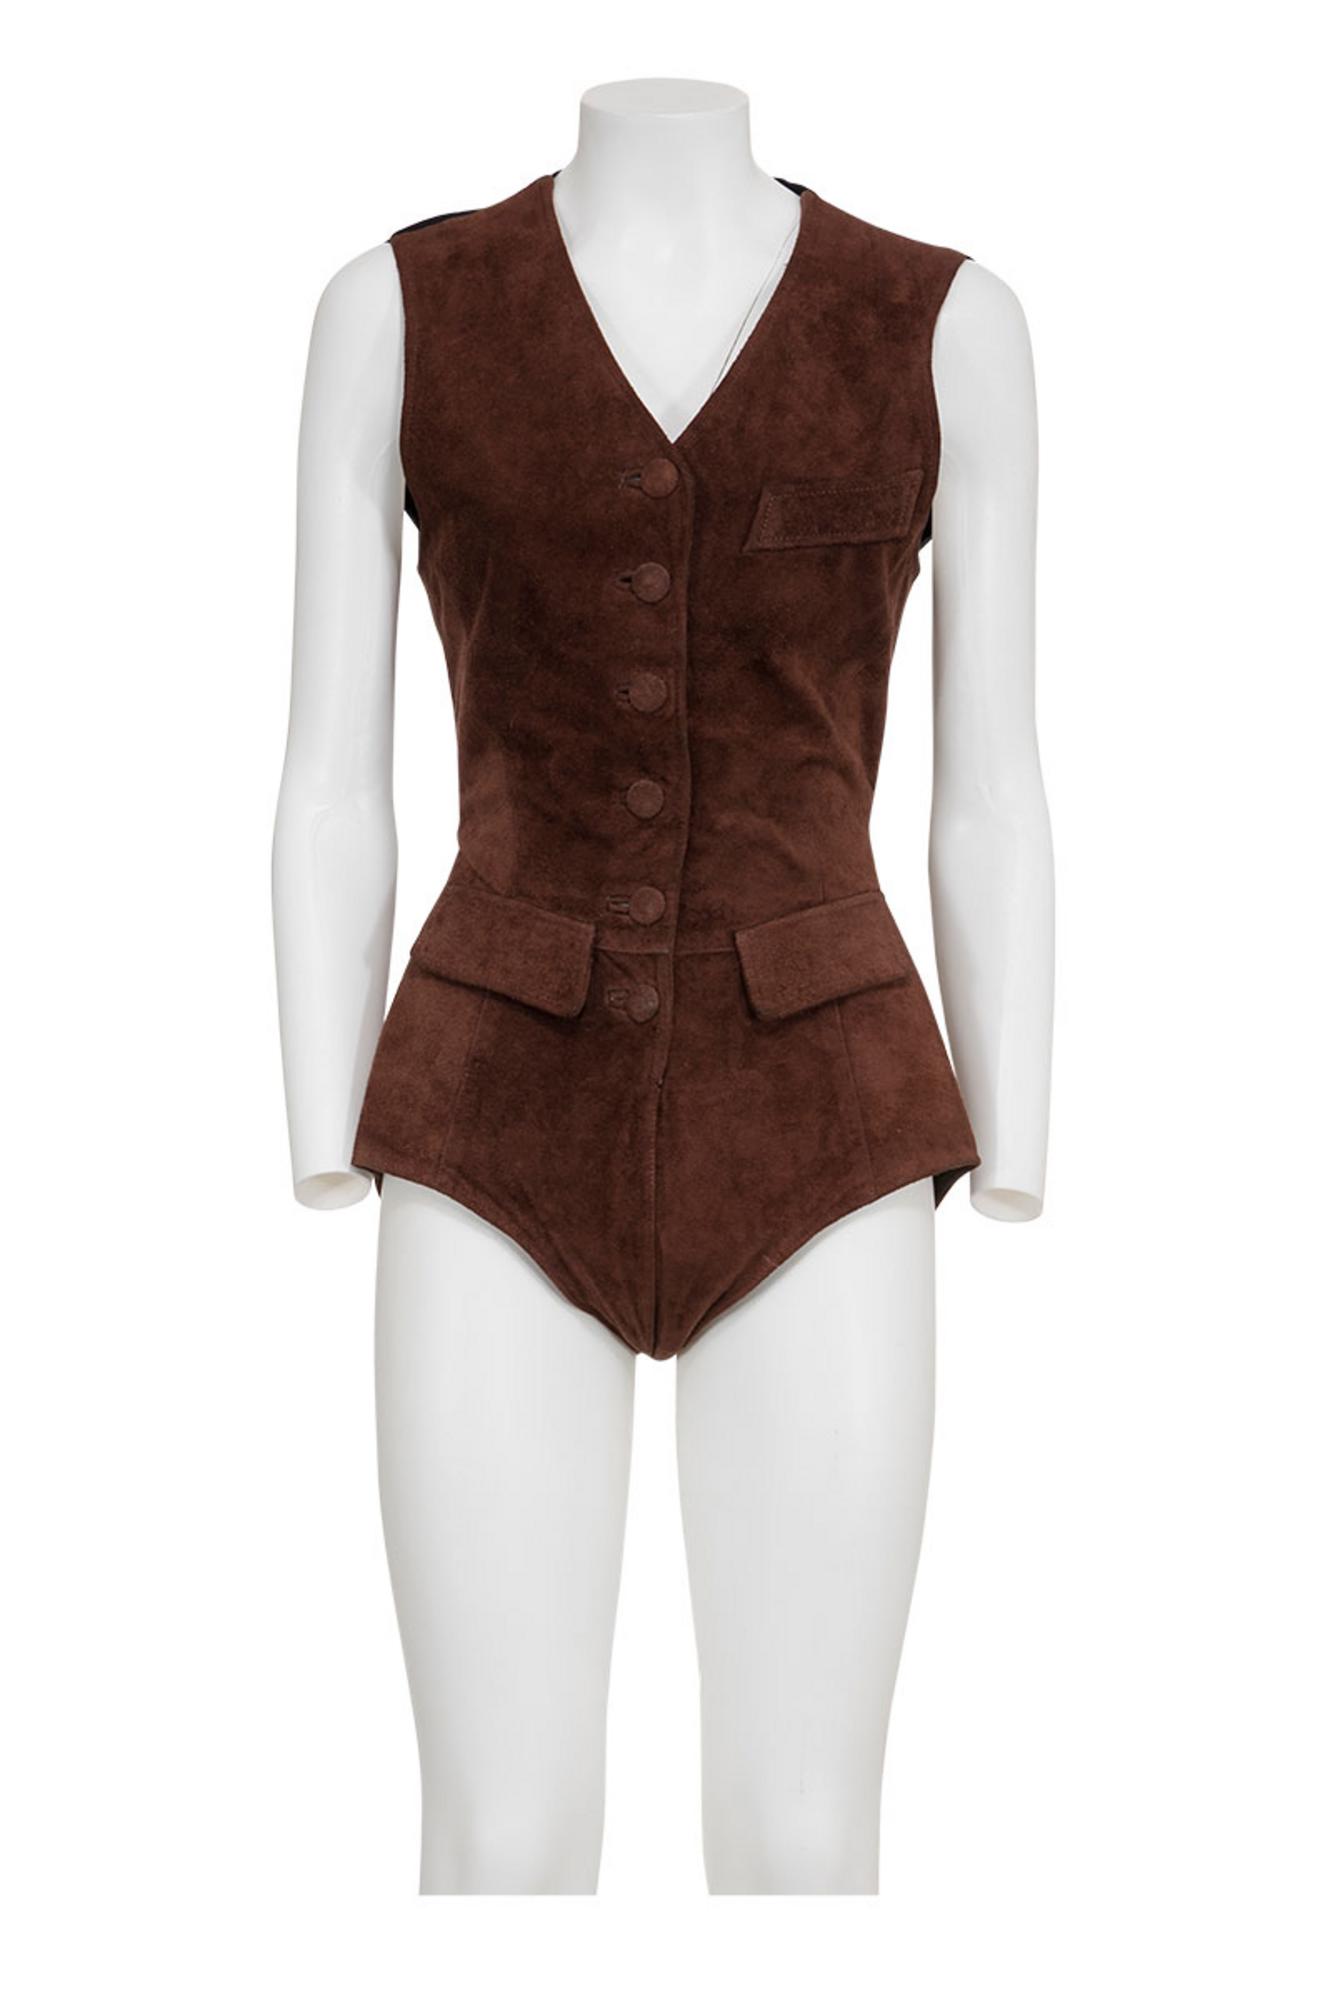 JEAN PAUL GAULTIER Rare and iconic suede body DESCRIPTION: Rare ance iconic...